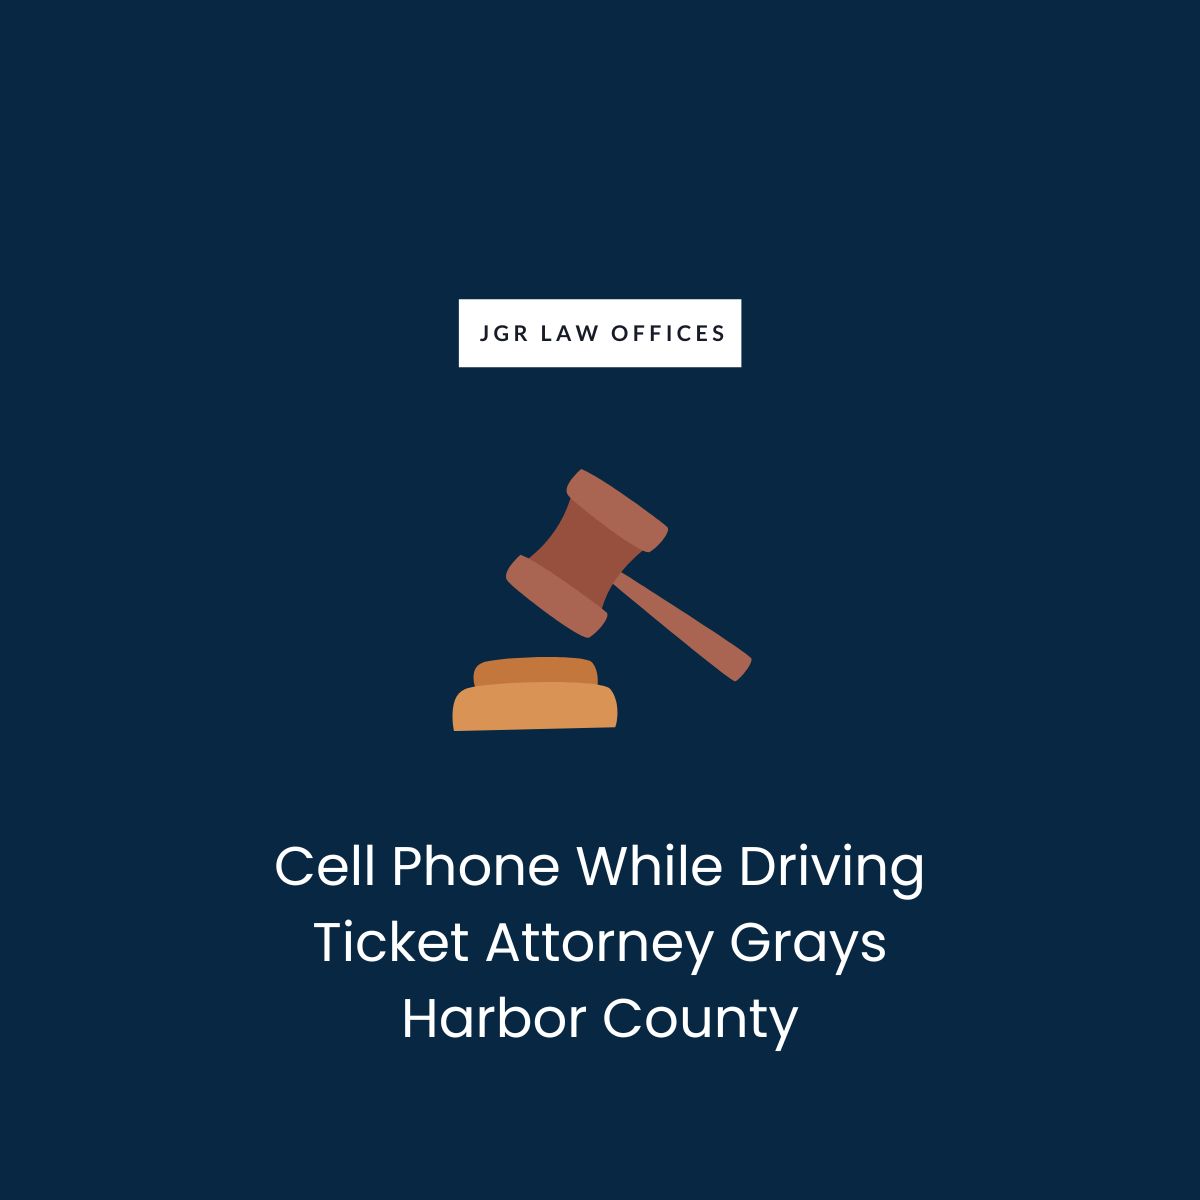 Cell Phone While Driving Ticket Attorney Grays Harbor County